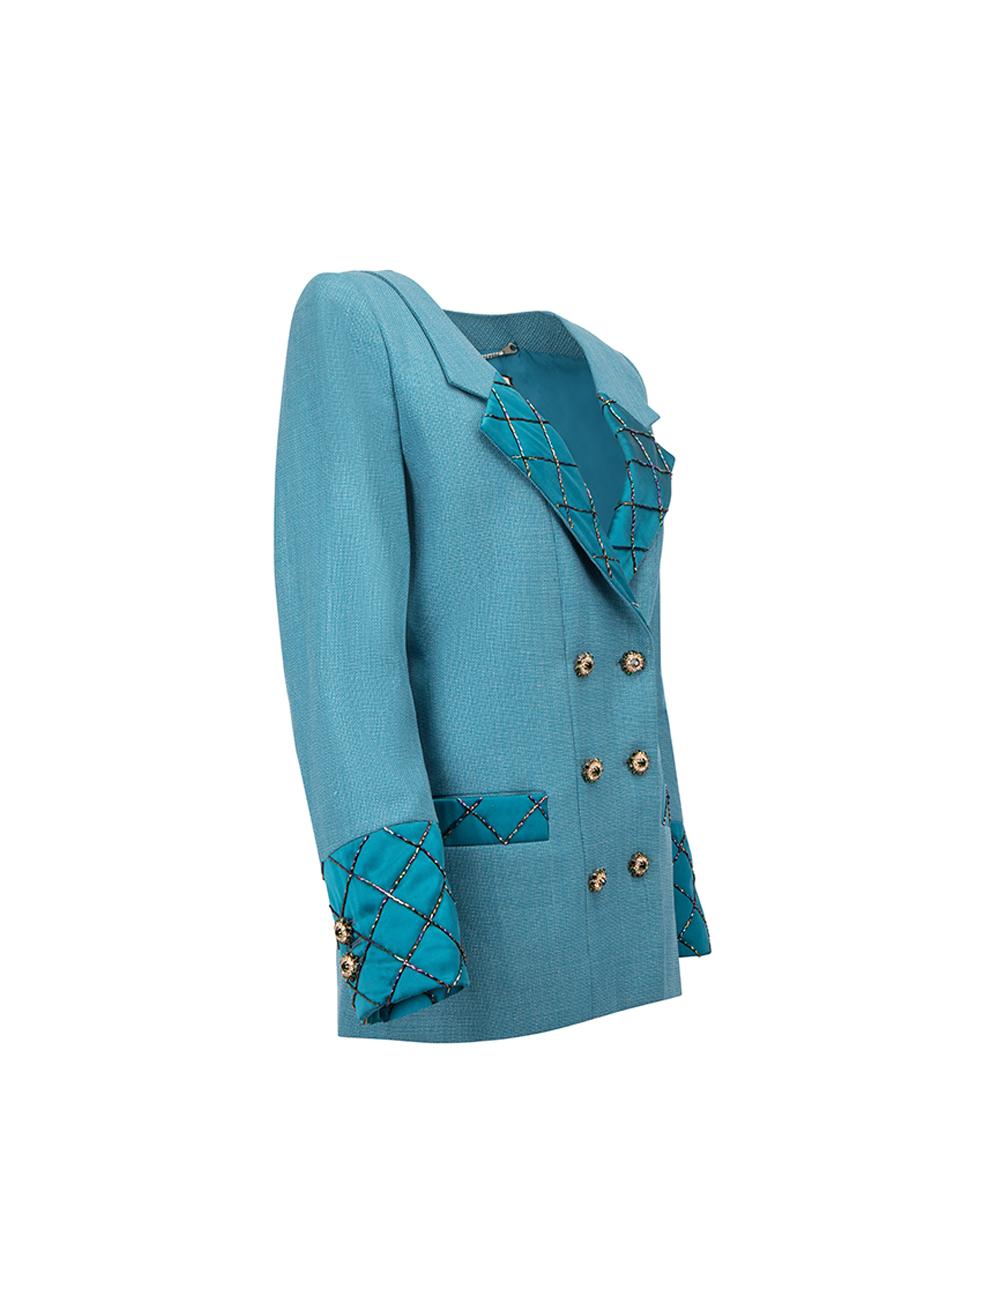 CONDITION is Very good. Hardly any visible wear to blazer is evident. Minor thread pulls to blazer are seen on this Sanne designer sample item. 
 
 Details
  Designer sample Item
 Teal
 Tweed
 Blazer
 Double breasted gemstones buttons
 Buttoned